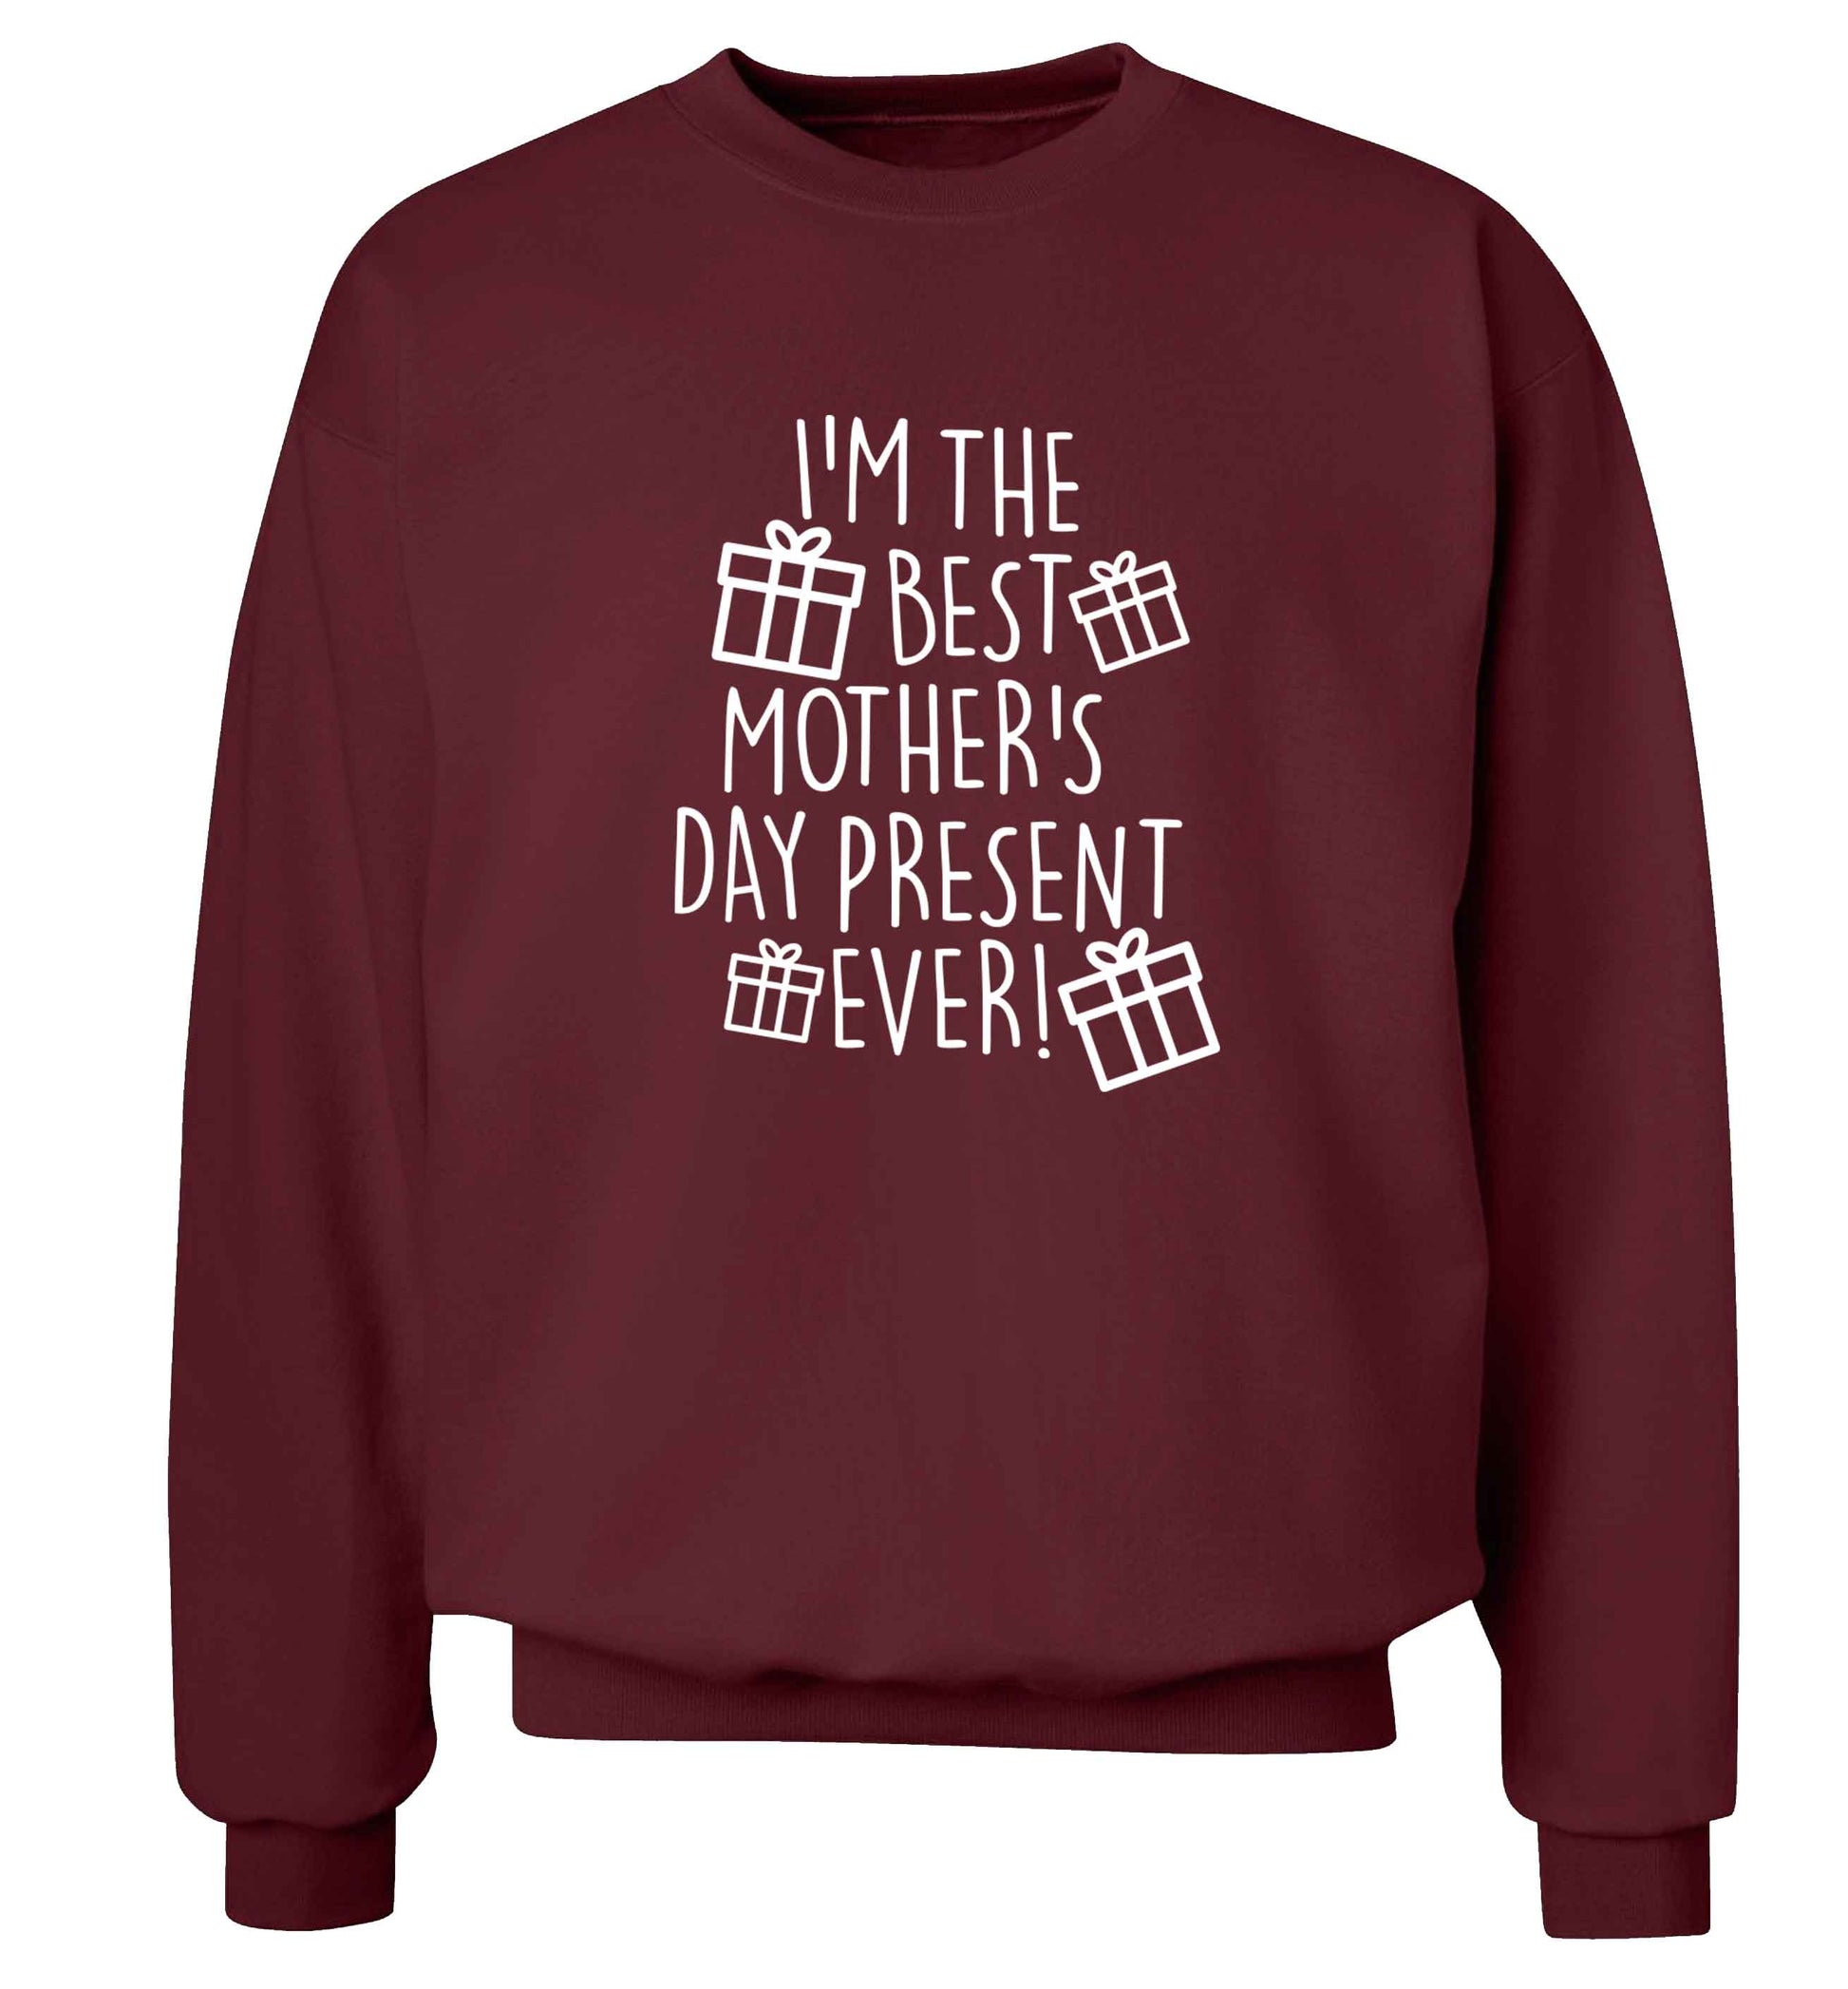 I'm the best mother's day present ever! adult's unisex maroon sweater 2XL